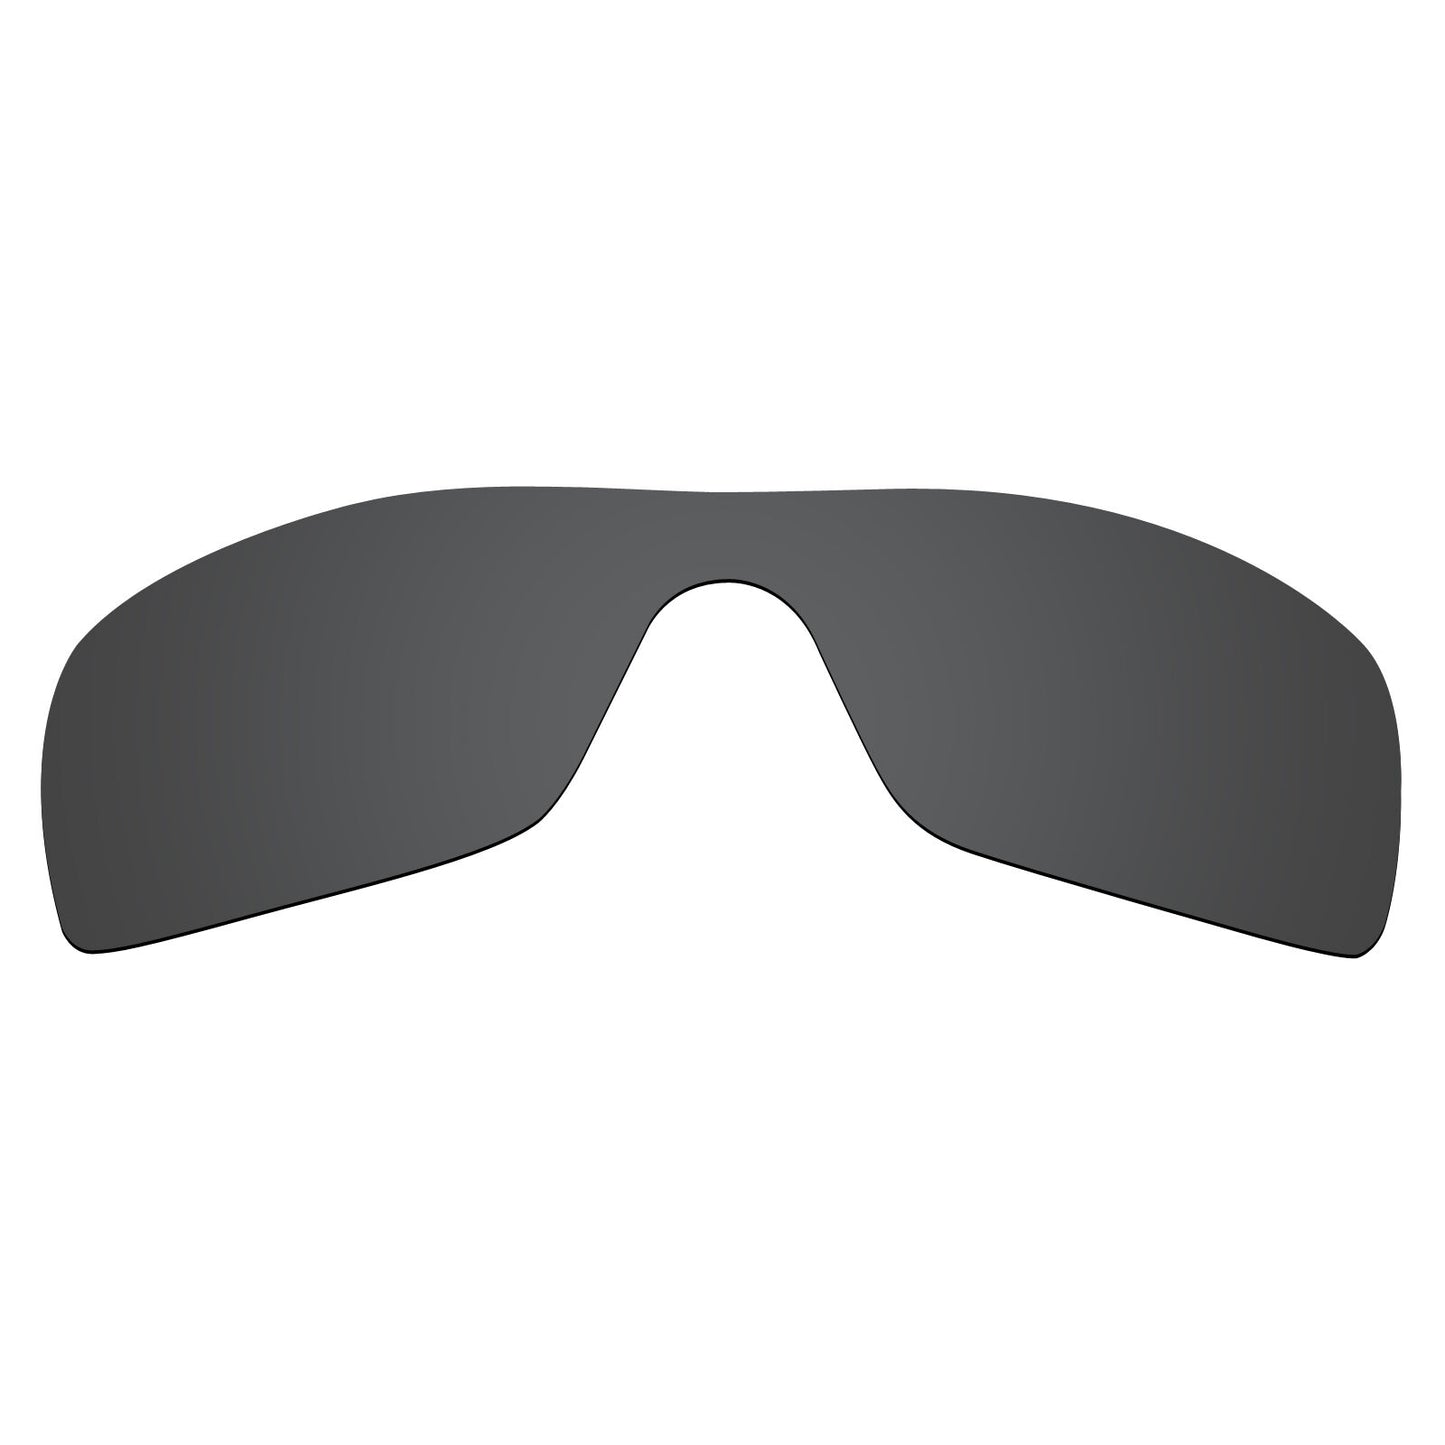 Hawkry Polarized Replacement Lenses for-Oakley Batwolf Sunglass Stealth Black